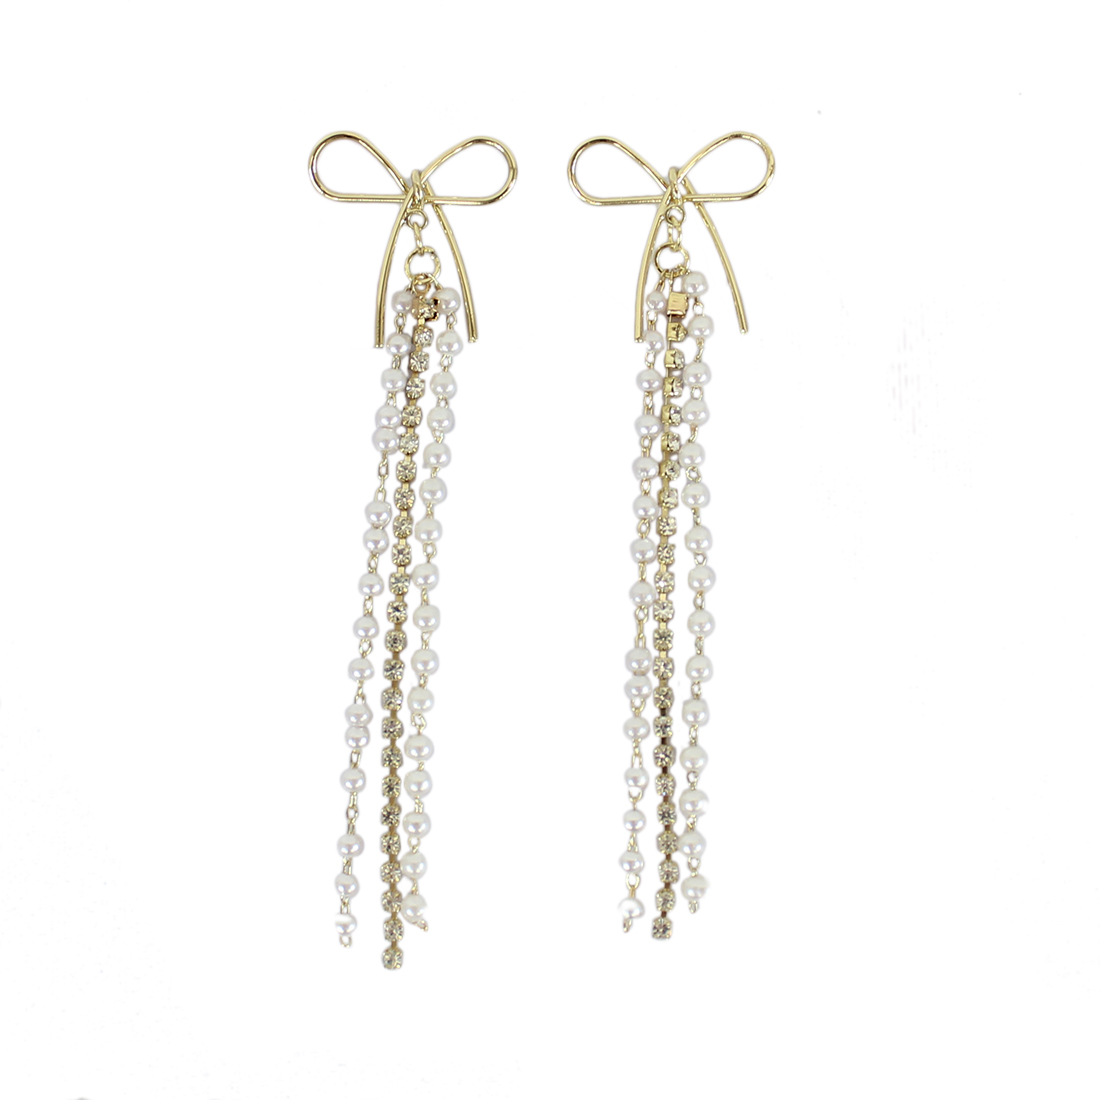 Super long pearl earrings with bow start